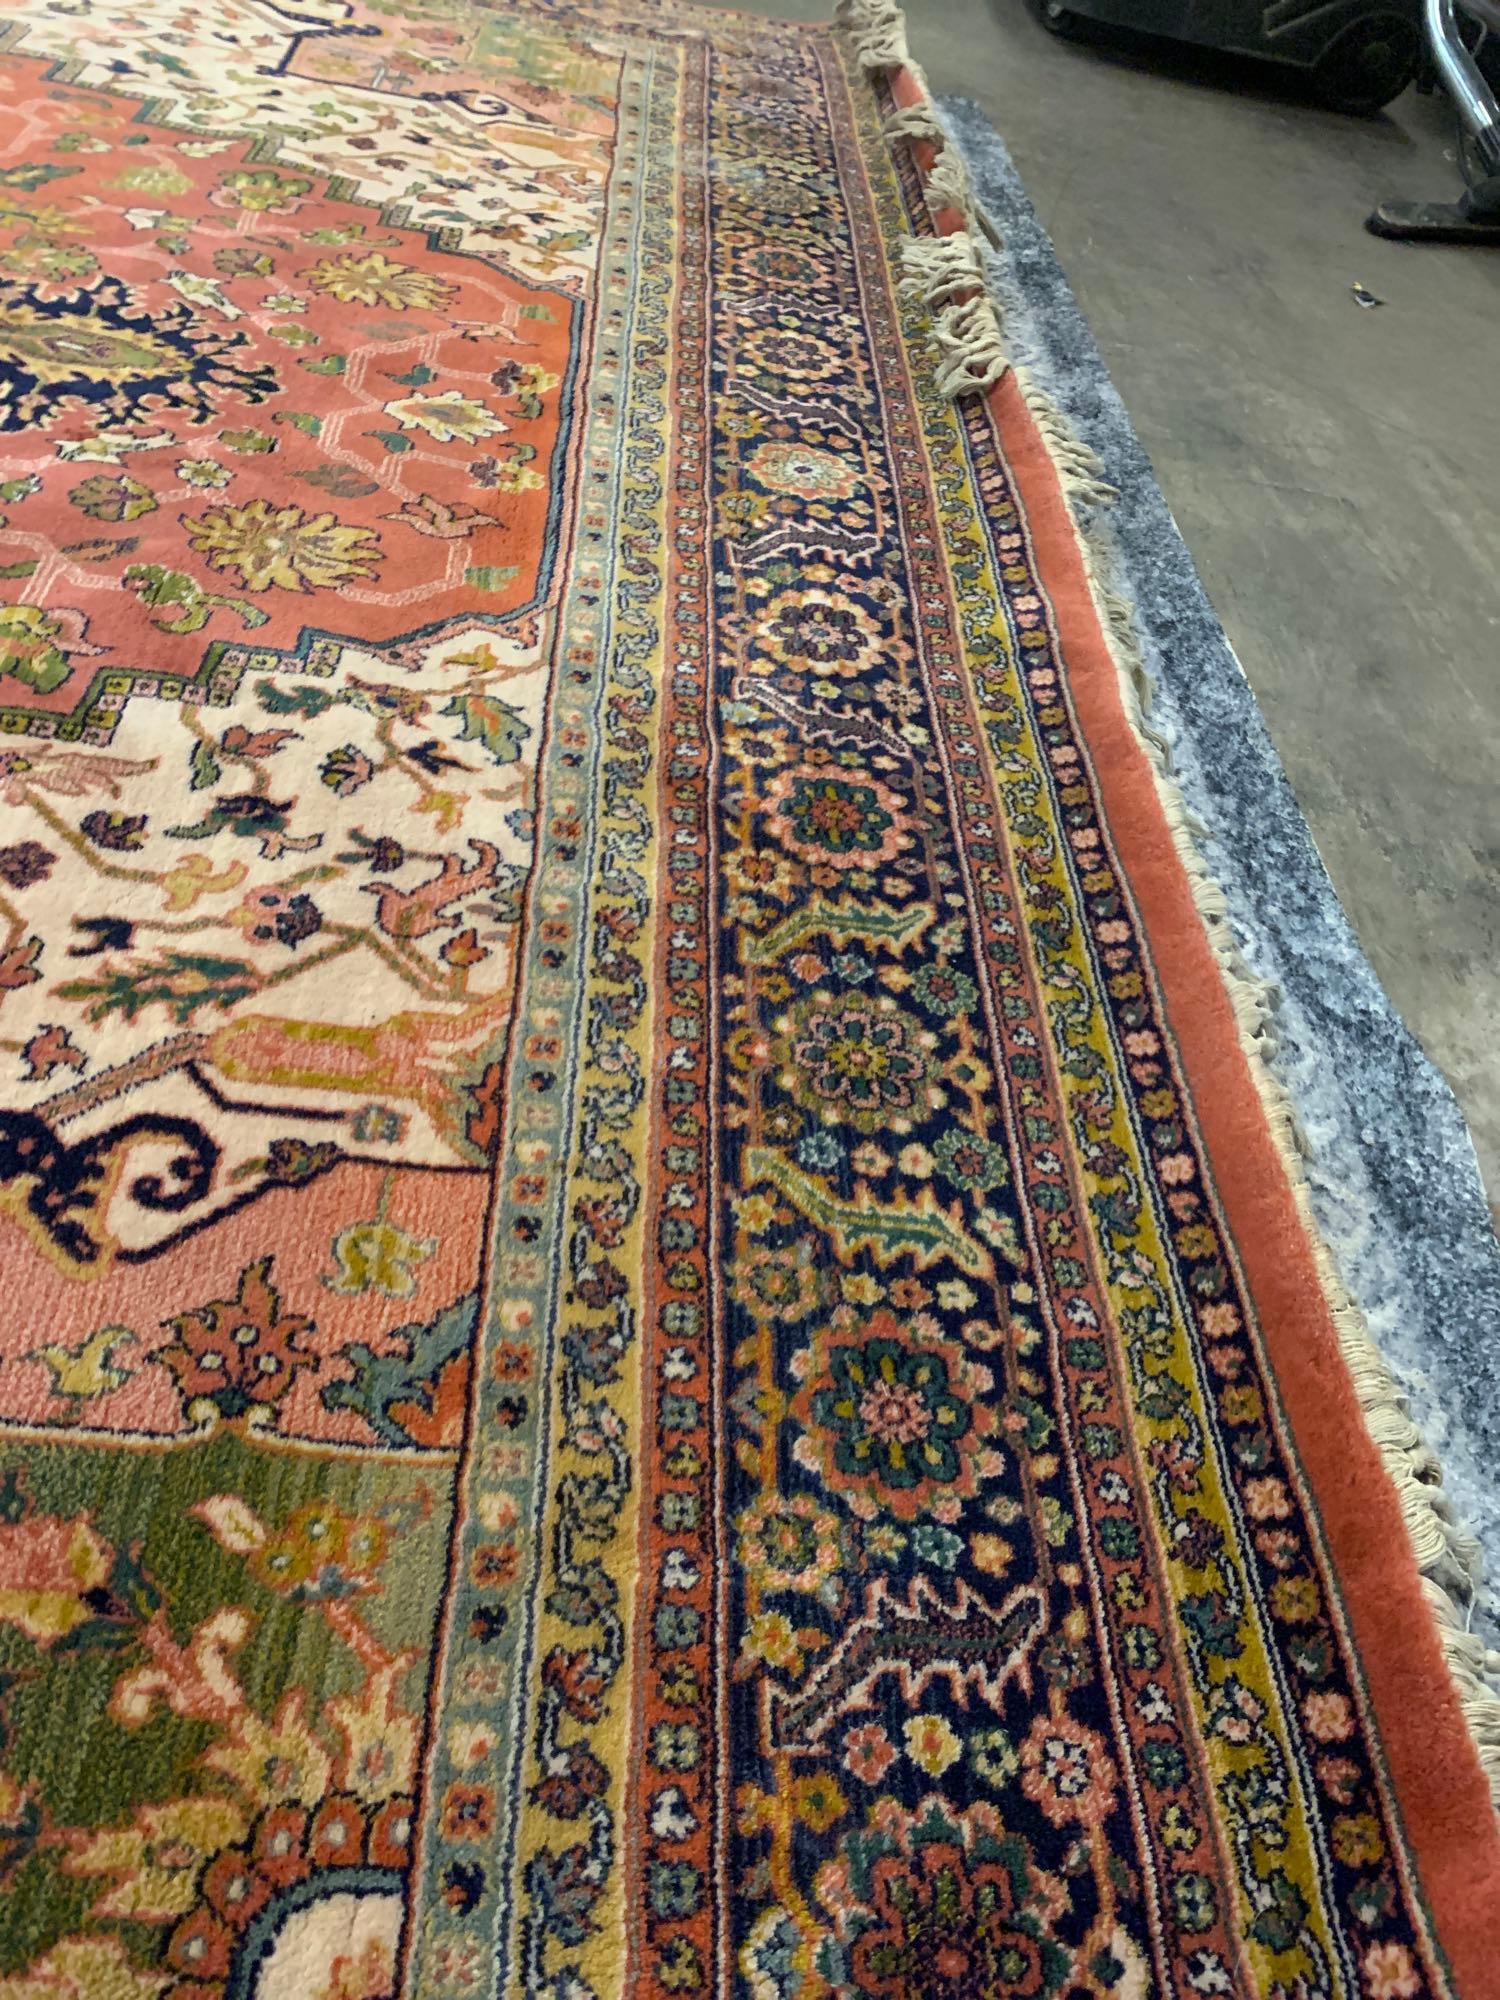 Jaipur Carpet, Rajhastan, North India, Wool On Cotton Foundation. With A Persian 'Heriz' Design, The - Image 7 of 7